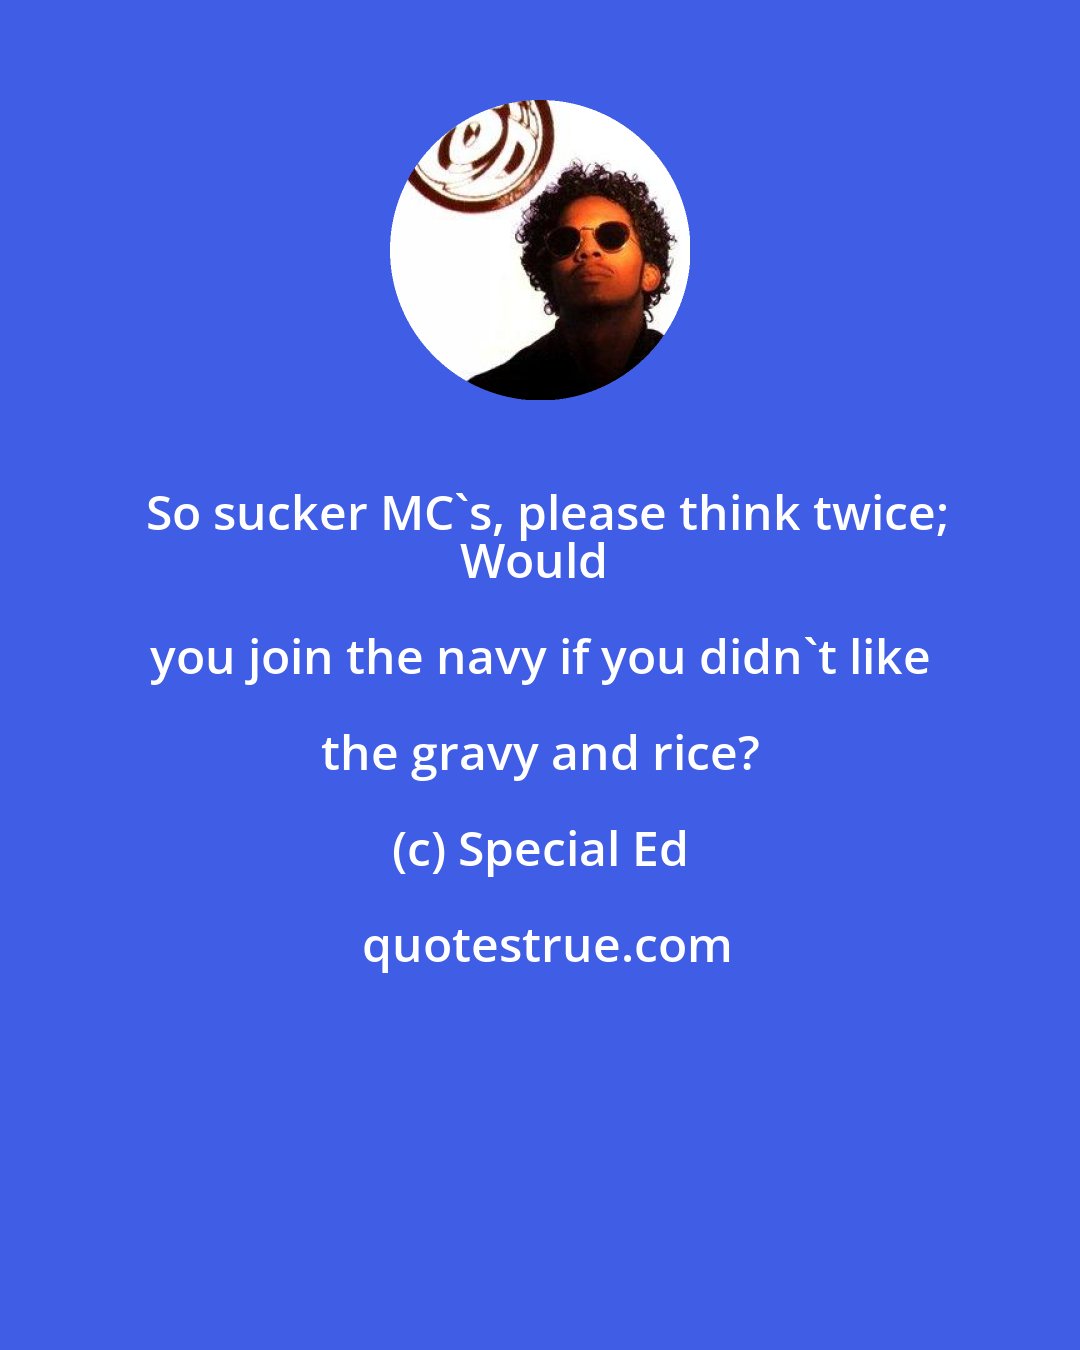 Special Ed: So sucker MC's, please think twice;
Would you join the navy if you didn't like the gravy and rice?